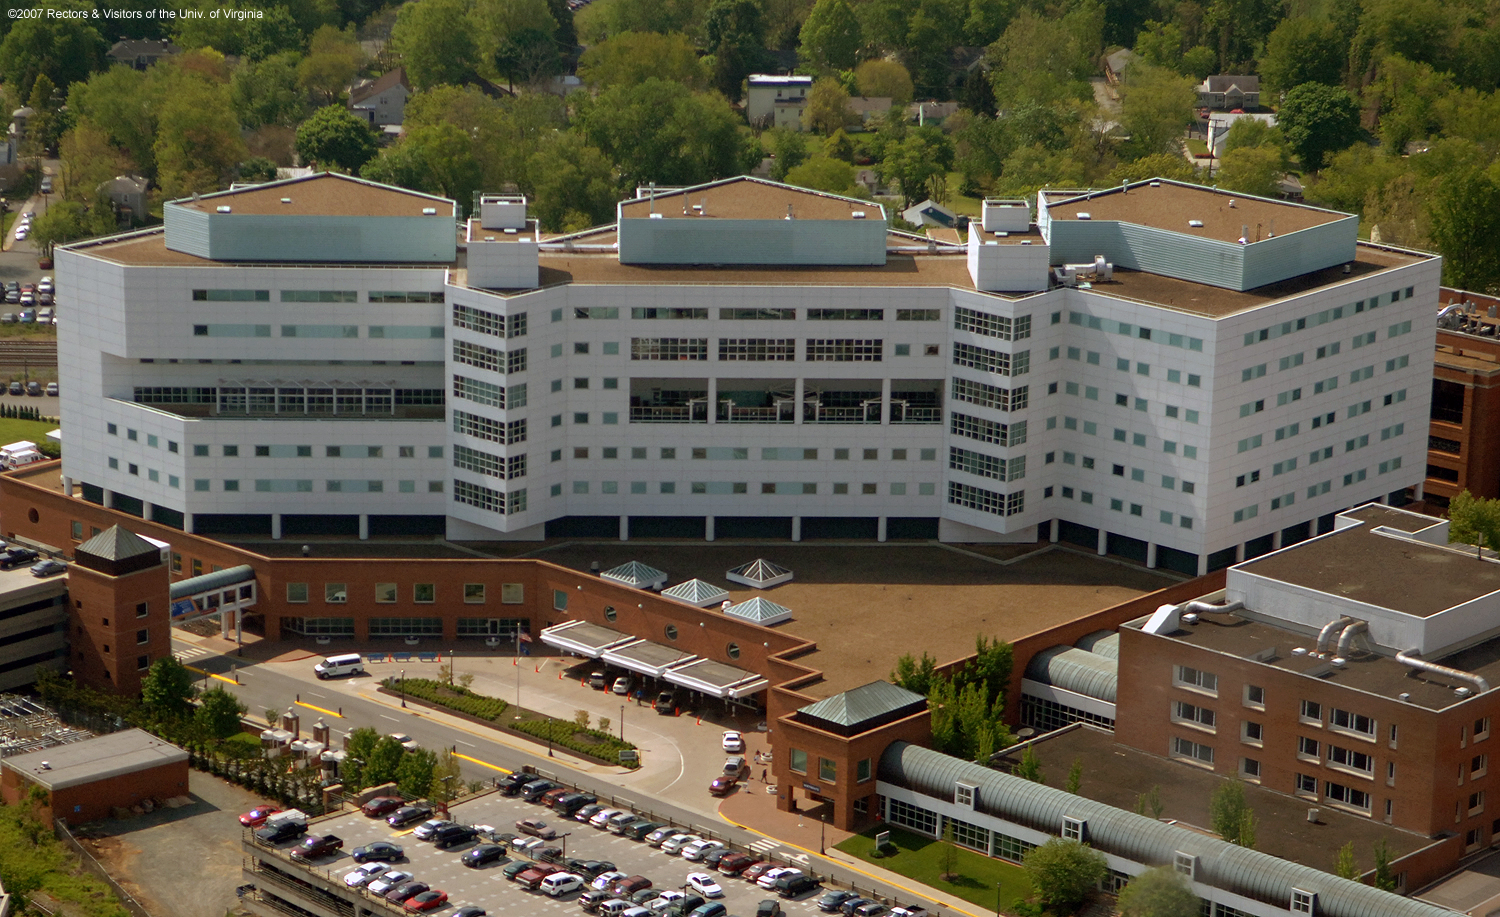 Aerial view of the UVA hospital